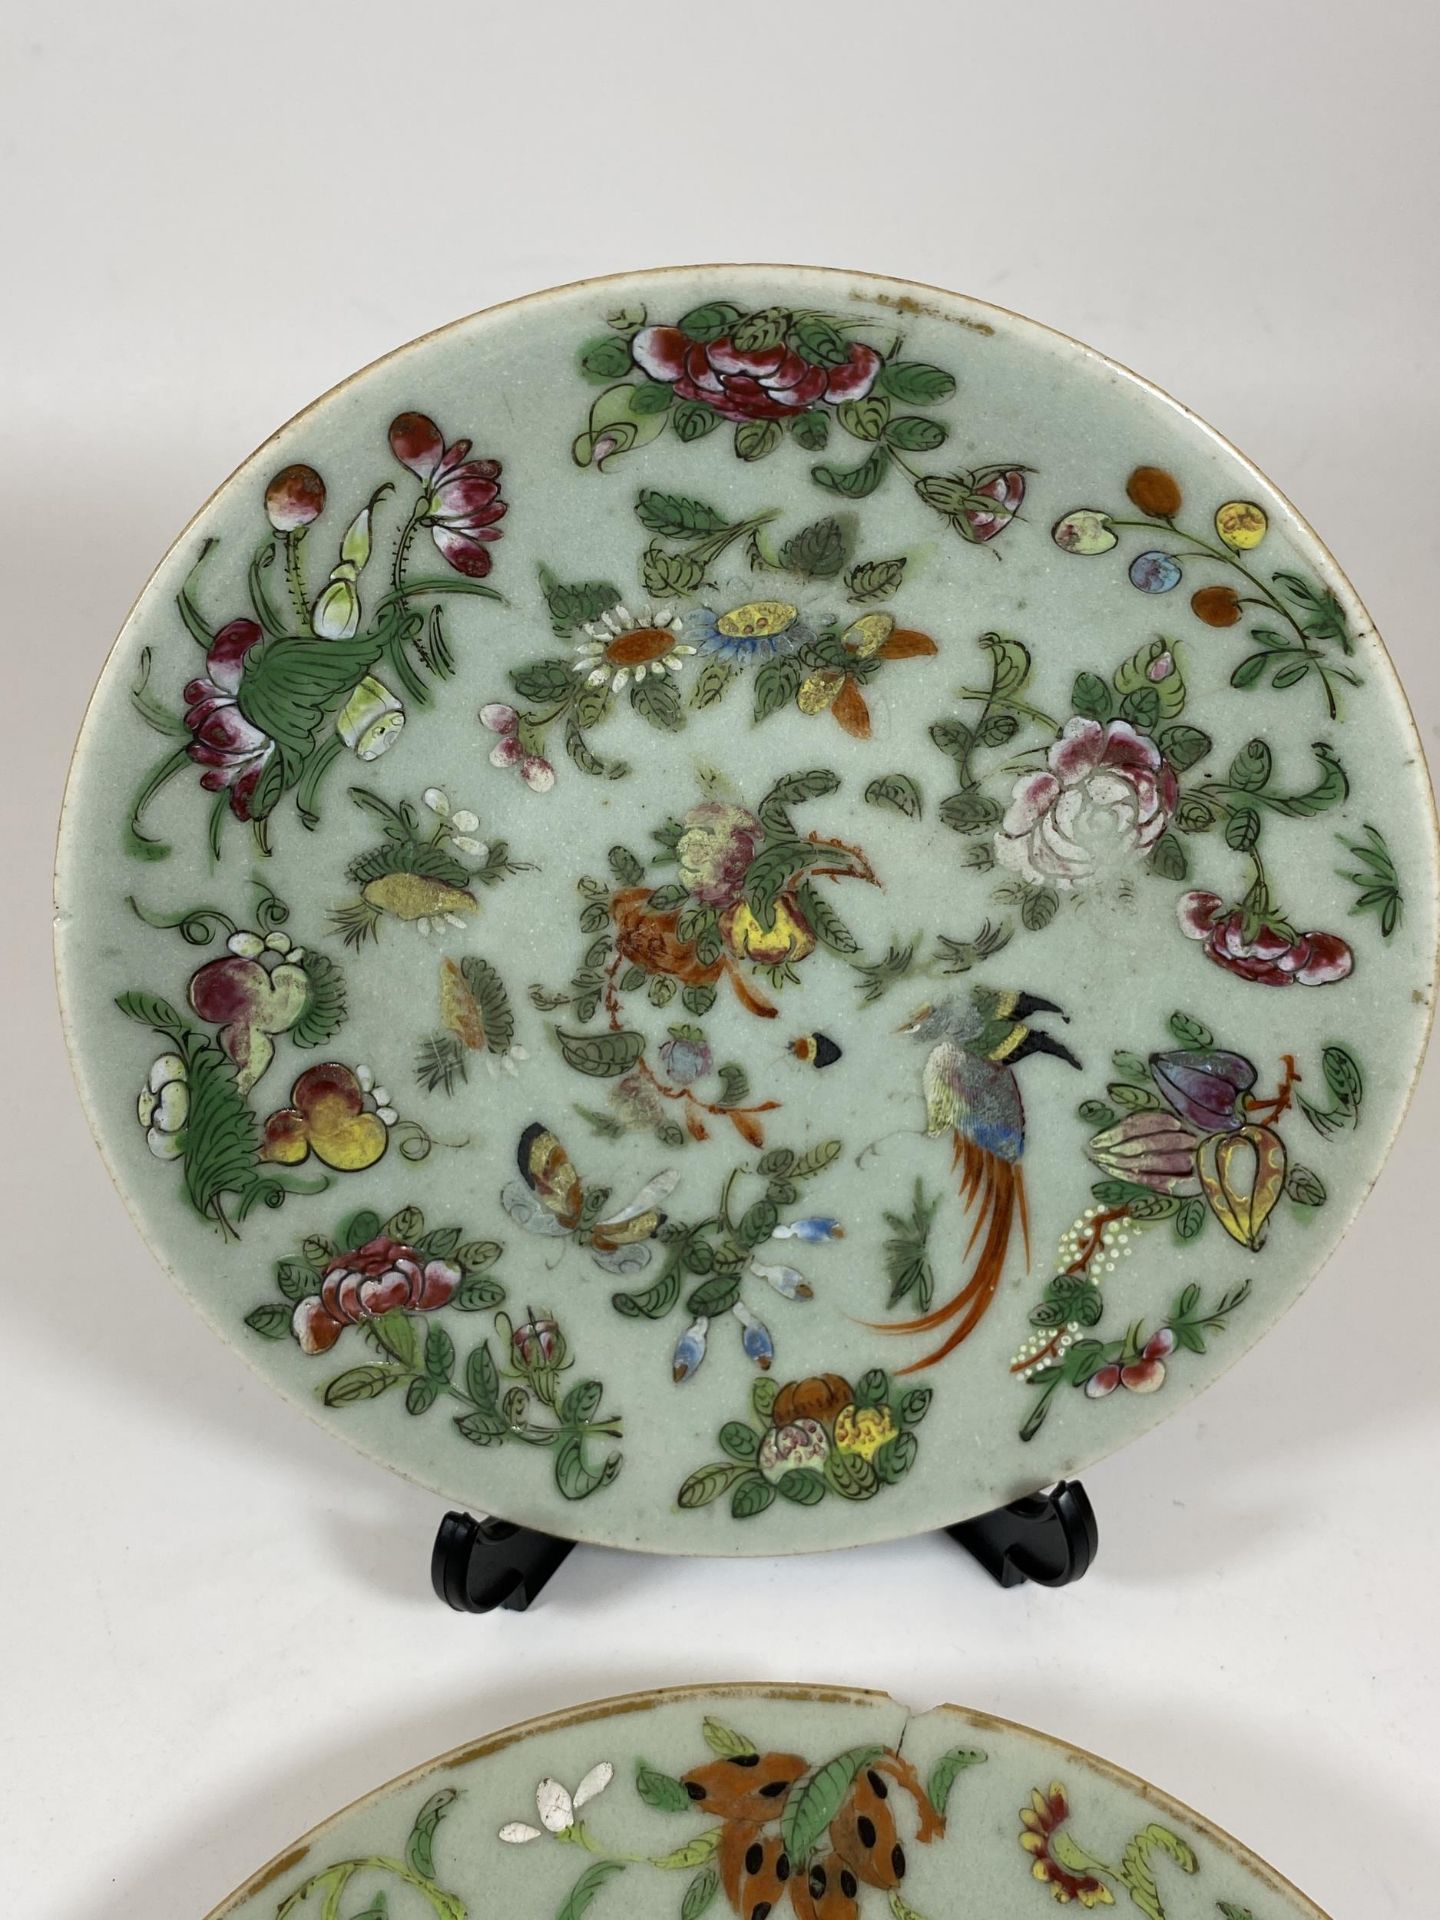 A PAIR OF 19TH CENTURY QING CHINESE CELADON GROUND BIRD AND FLORAL DESIGN PLATES, DIAMETER 18CM - Image 3 of 6